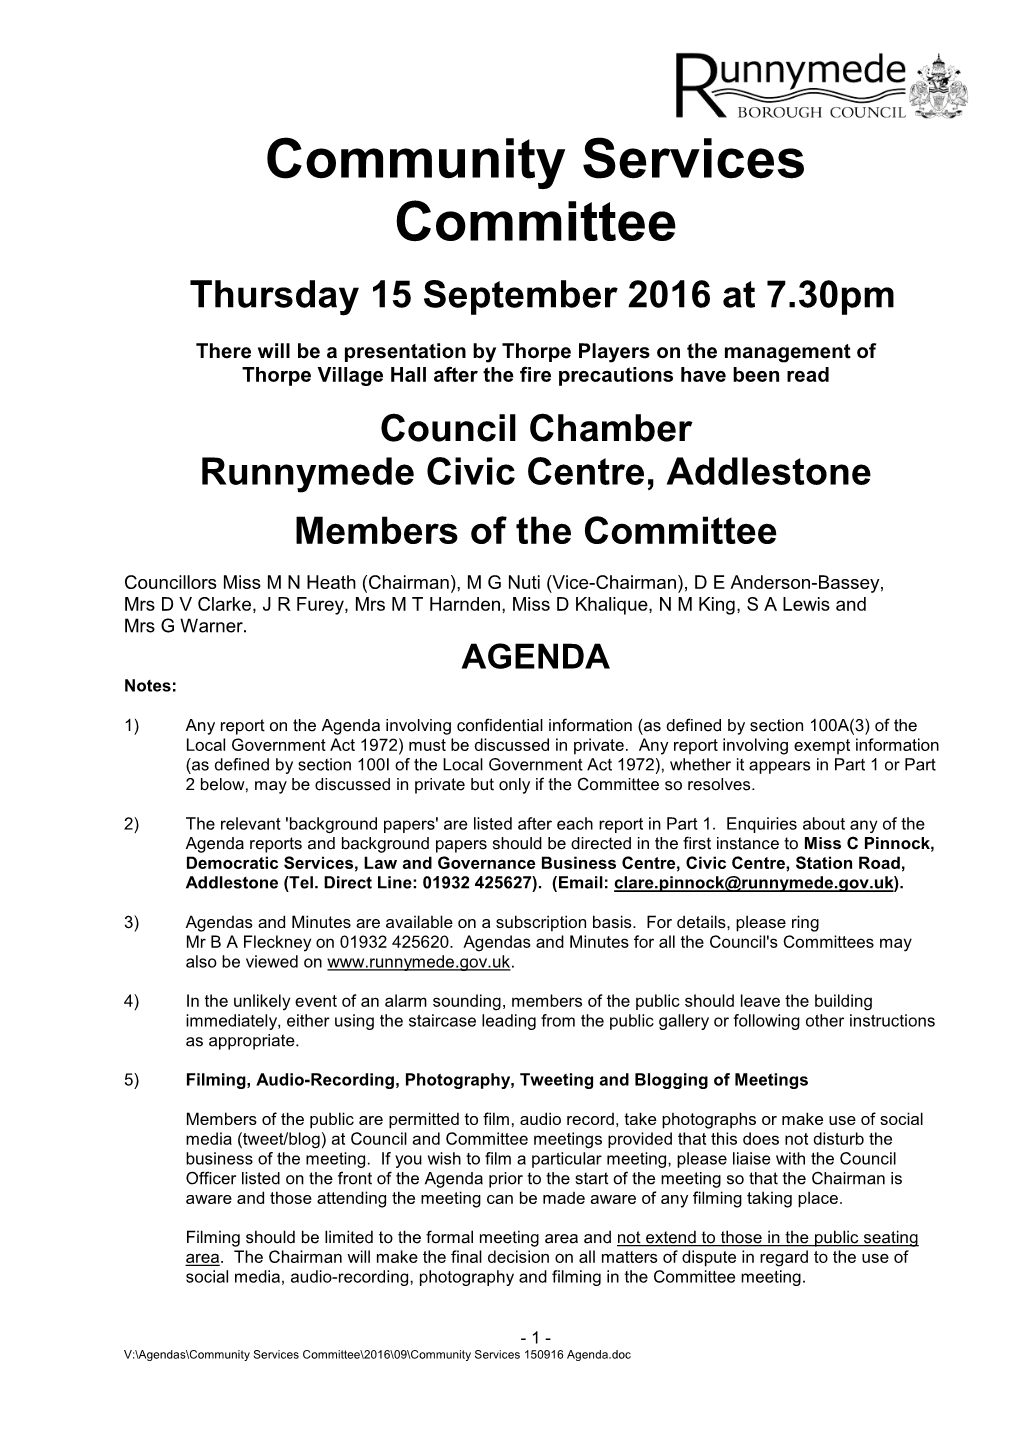 Community Services Committee Agenda 15 September 2016